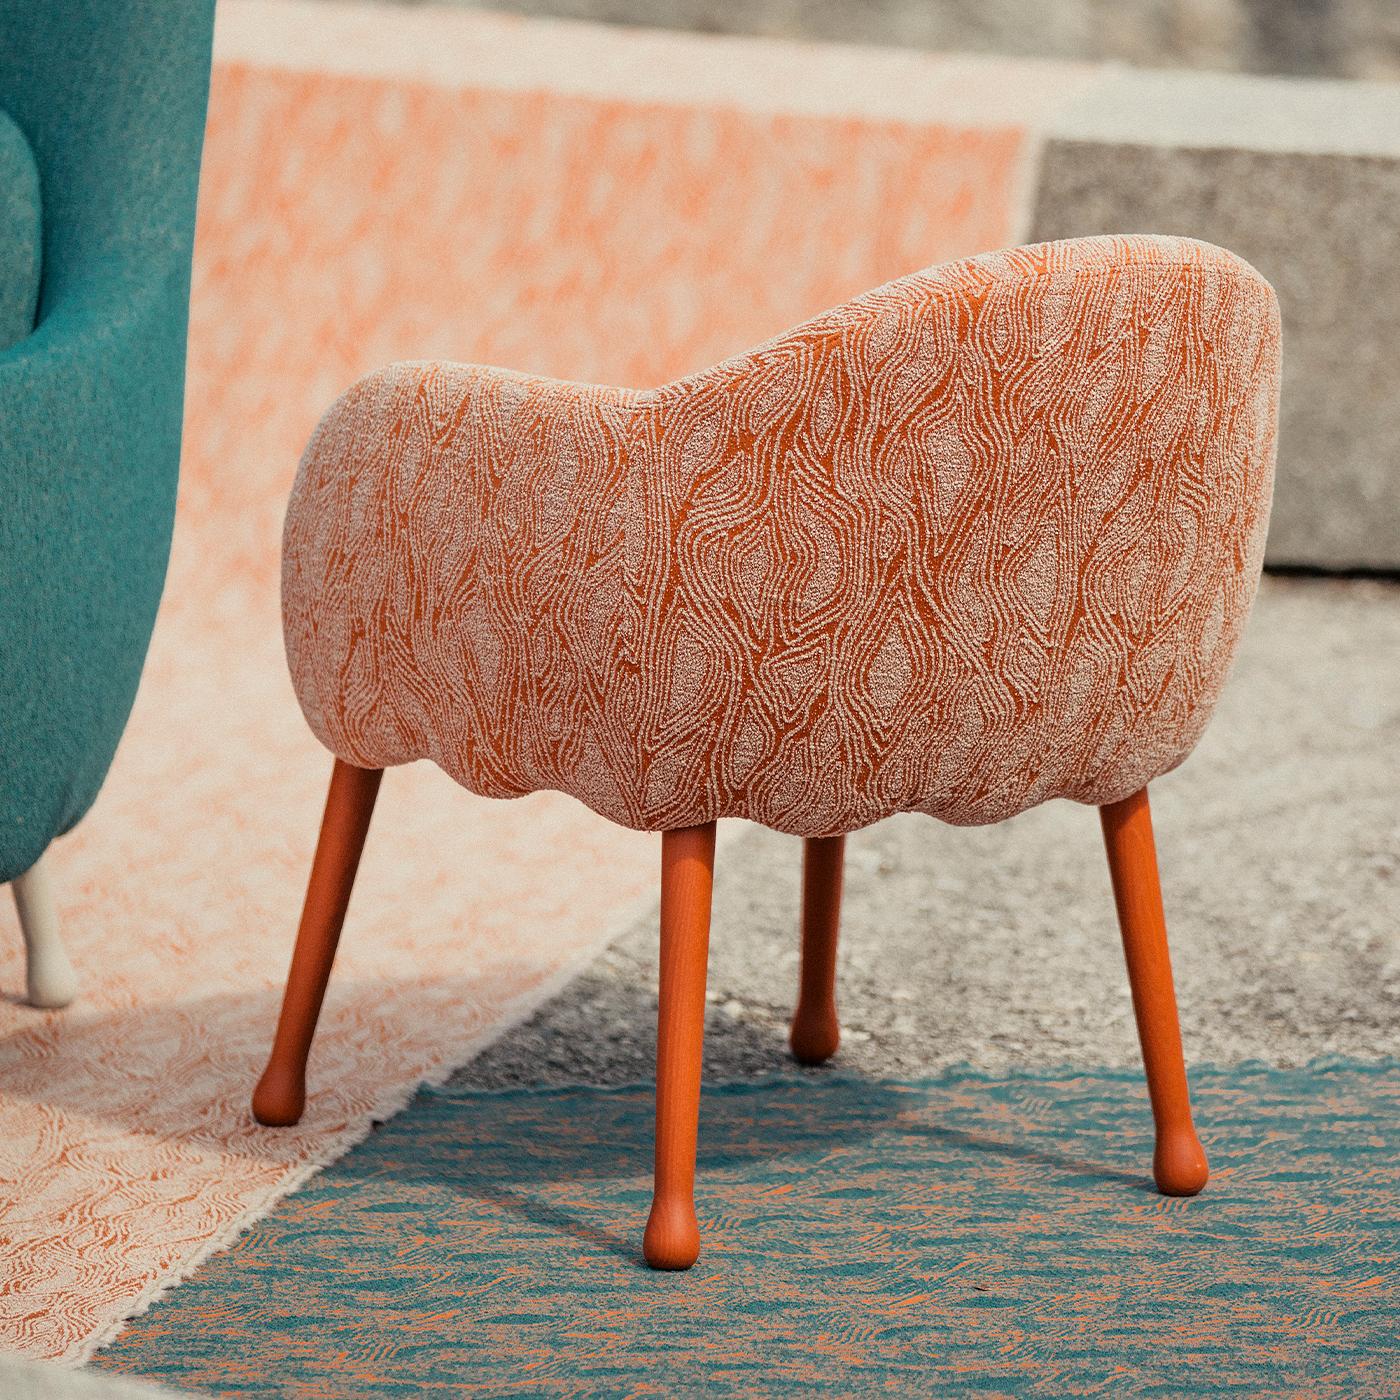 This glamorous armchair will imbue modern interiors with eclectic charm, emphasized by the floral inspiration revealed by the scalloped edge outlining the seat's lower profile and by the stem-like, orange-lacquered legs in solid beech. The backrest